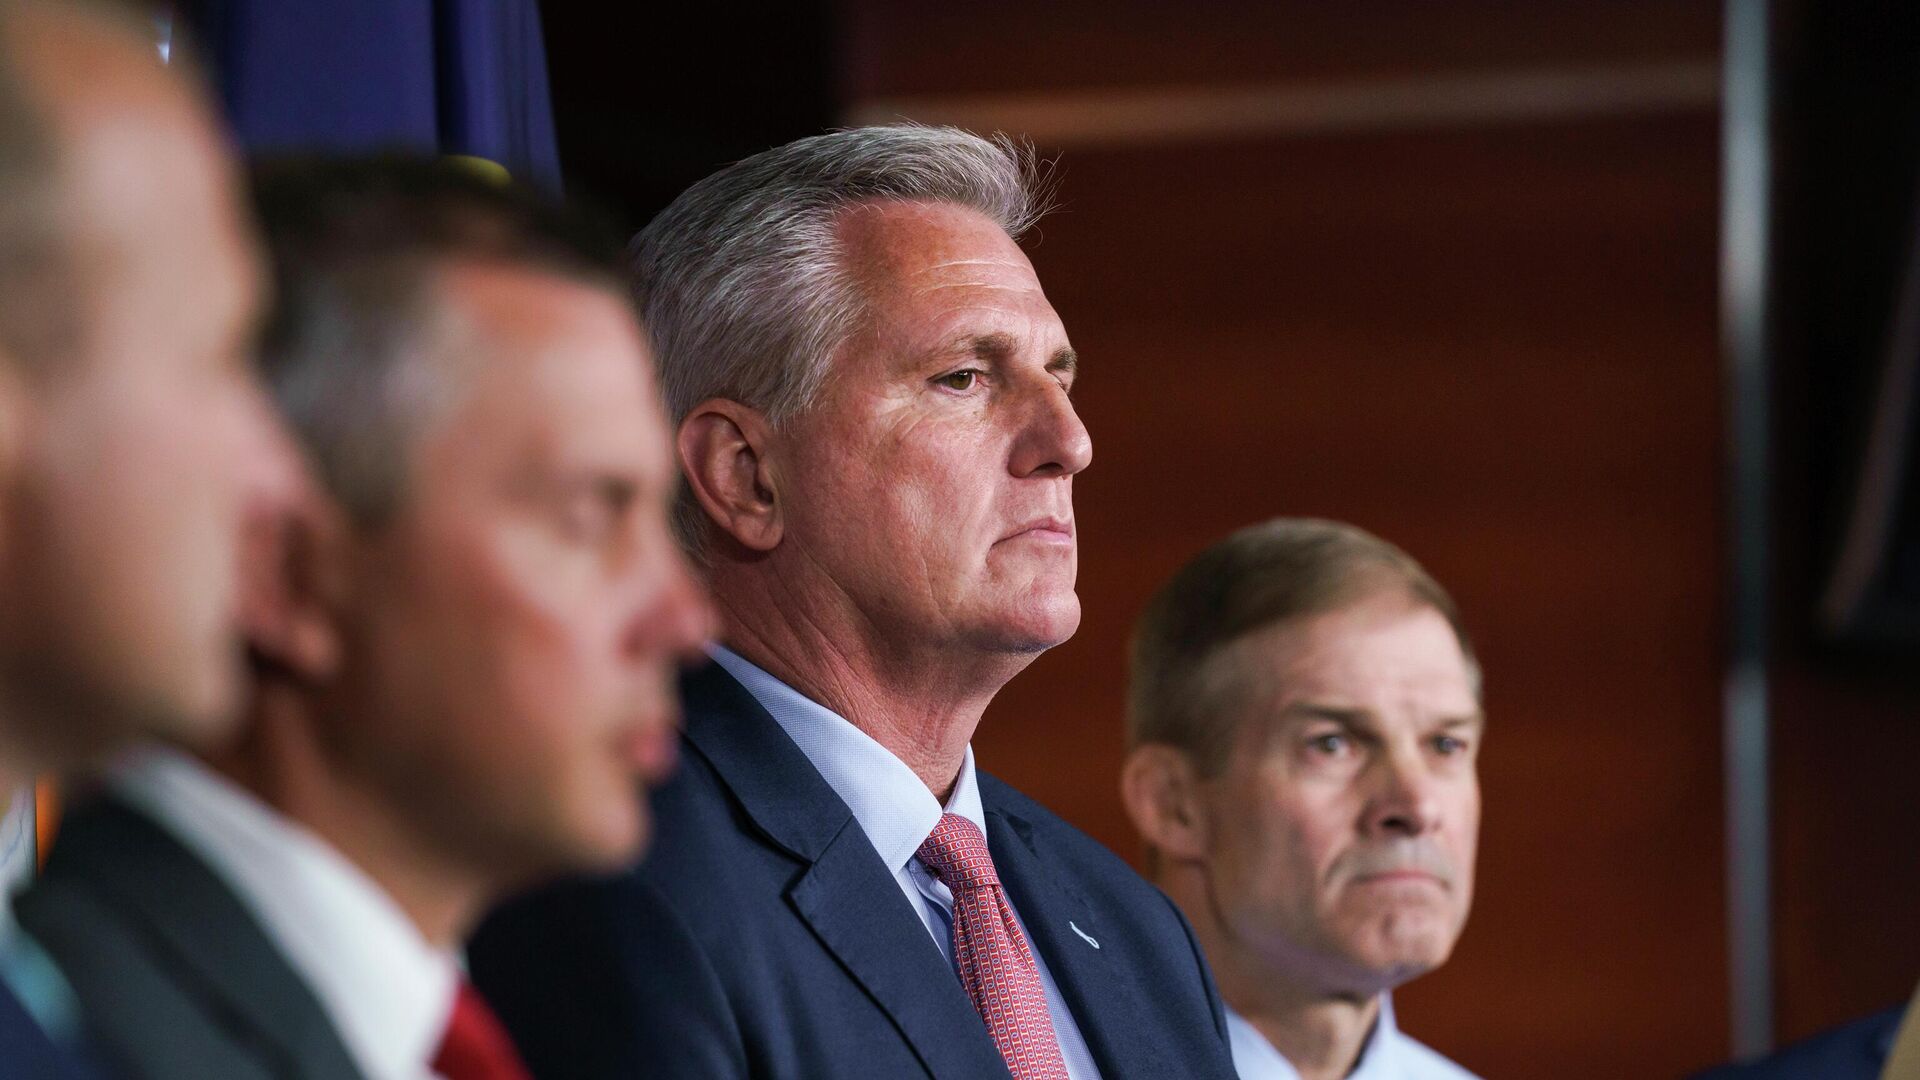 House Minority Leader Kevin McCarthy, R-Calif., center, joined at right by Rep. Jim Jordan, R-Ohio, pause during a news conference after House Speaker Nancy Pelosi rejected two Republicans chosen for the committee investigating the Jan. 6 Capitol insurrection, Rep. Jim Banks, R-Ind., and Rep. Jordan, R-Ohio, at the Capitol in Washington, Wednesday, July 21, 2021. McCarthy is denouncing the decision as an egregious abuse of power, by Pelosi.  - Sputnik International, 1920, 25.10.2022